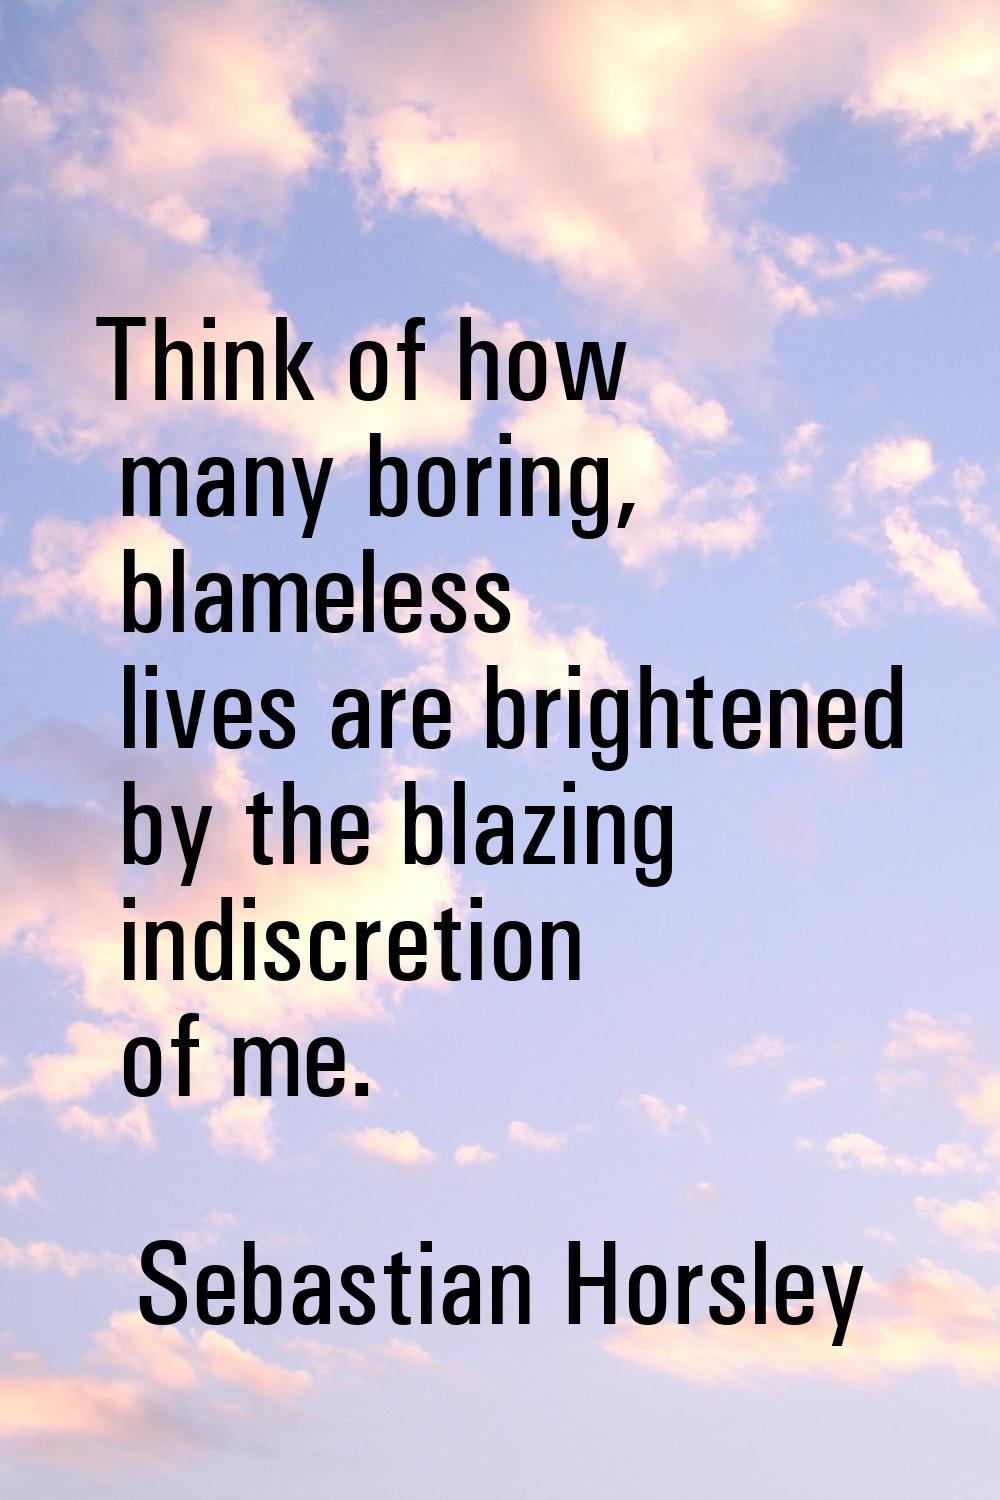 Think of how many boring, blameless lives are brightened by the blazing indiscretion of me.